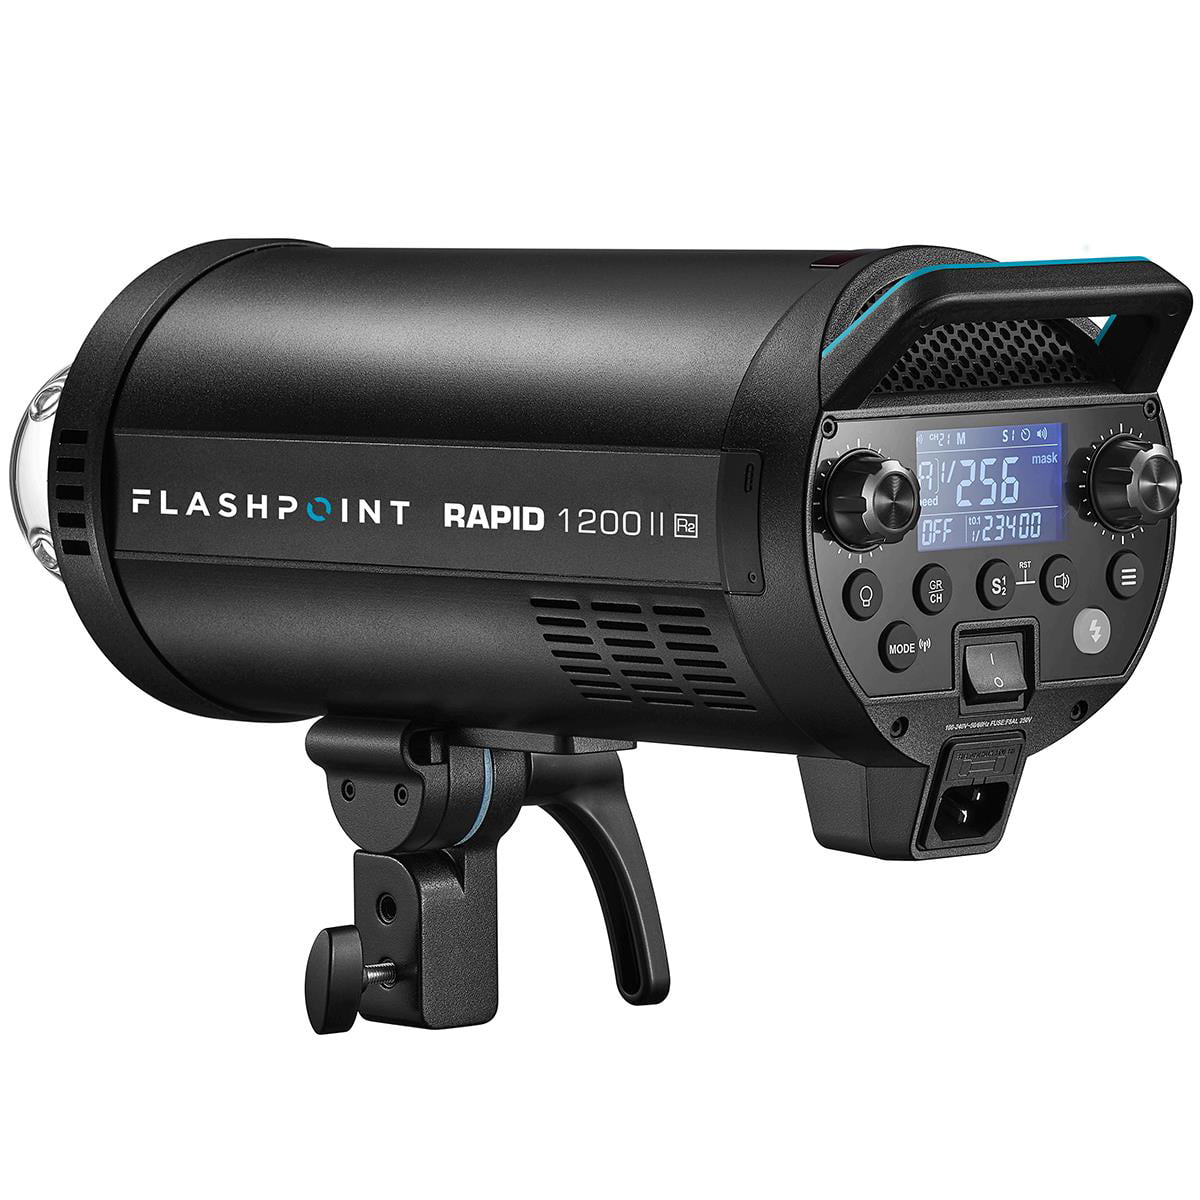 Flashpoint Rapid 1200 HSS Monolight with Built-in R2 2.4GHz Radio Remote System Bowens Mount 